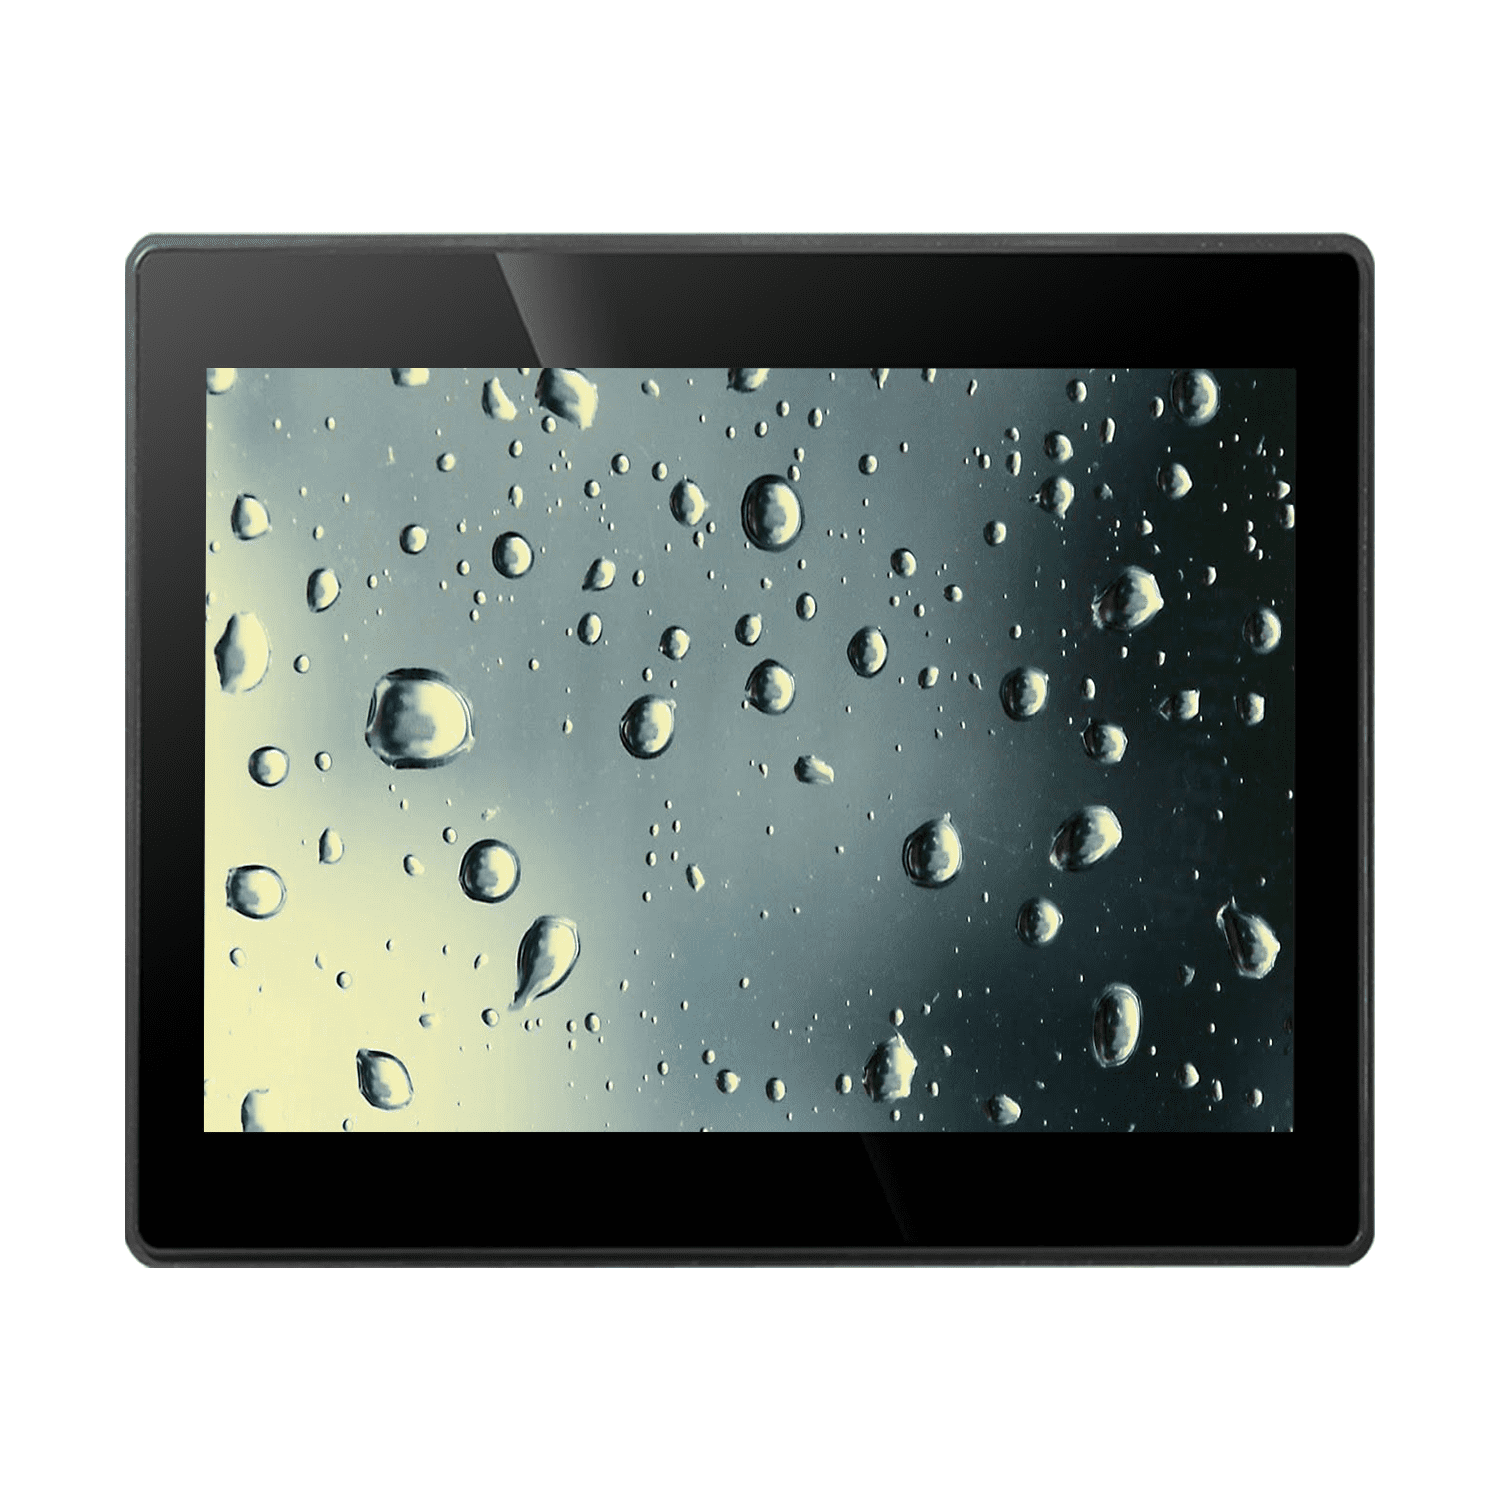 19 inch Kitchen Display System Waterproof Touch Screen Monitor IP65 waterproofing Embedded industrial all in one PC